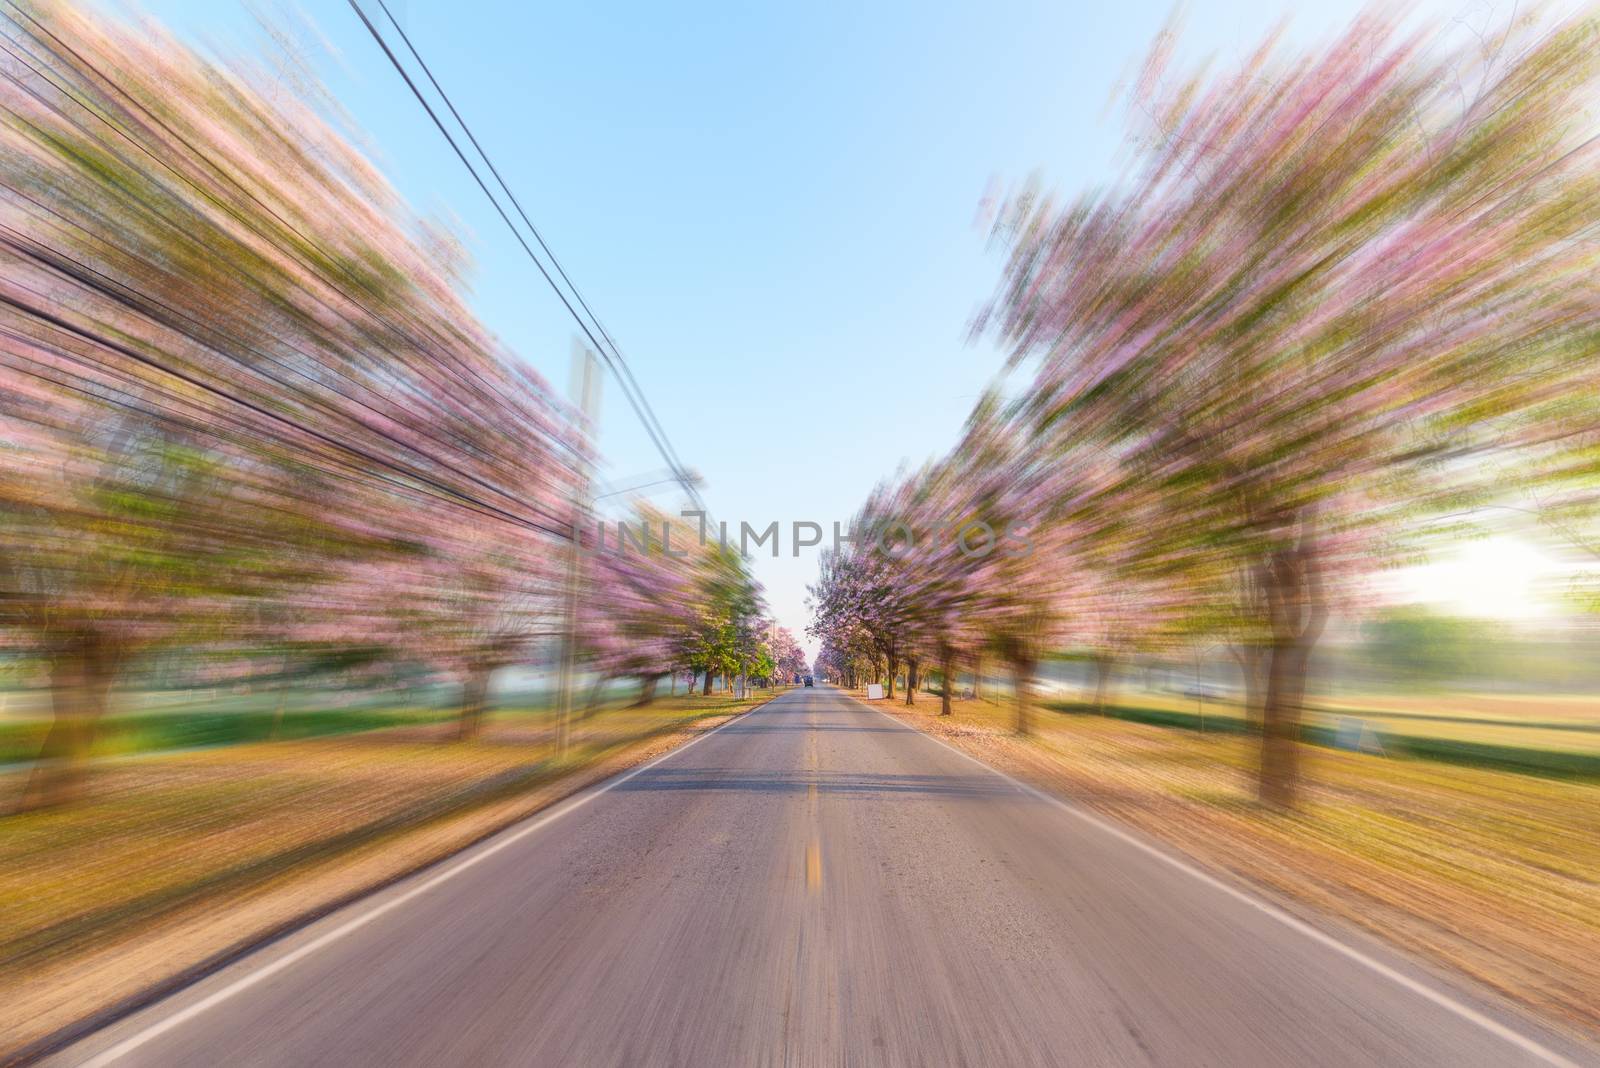 blur moving fast forward at the road of tree by rukawajung